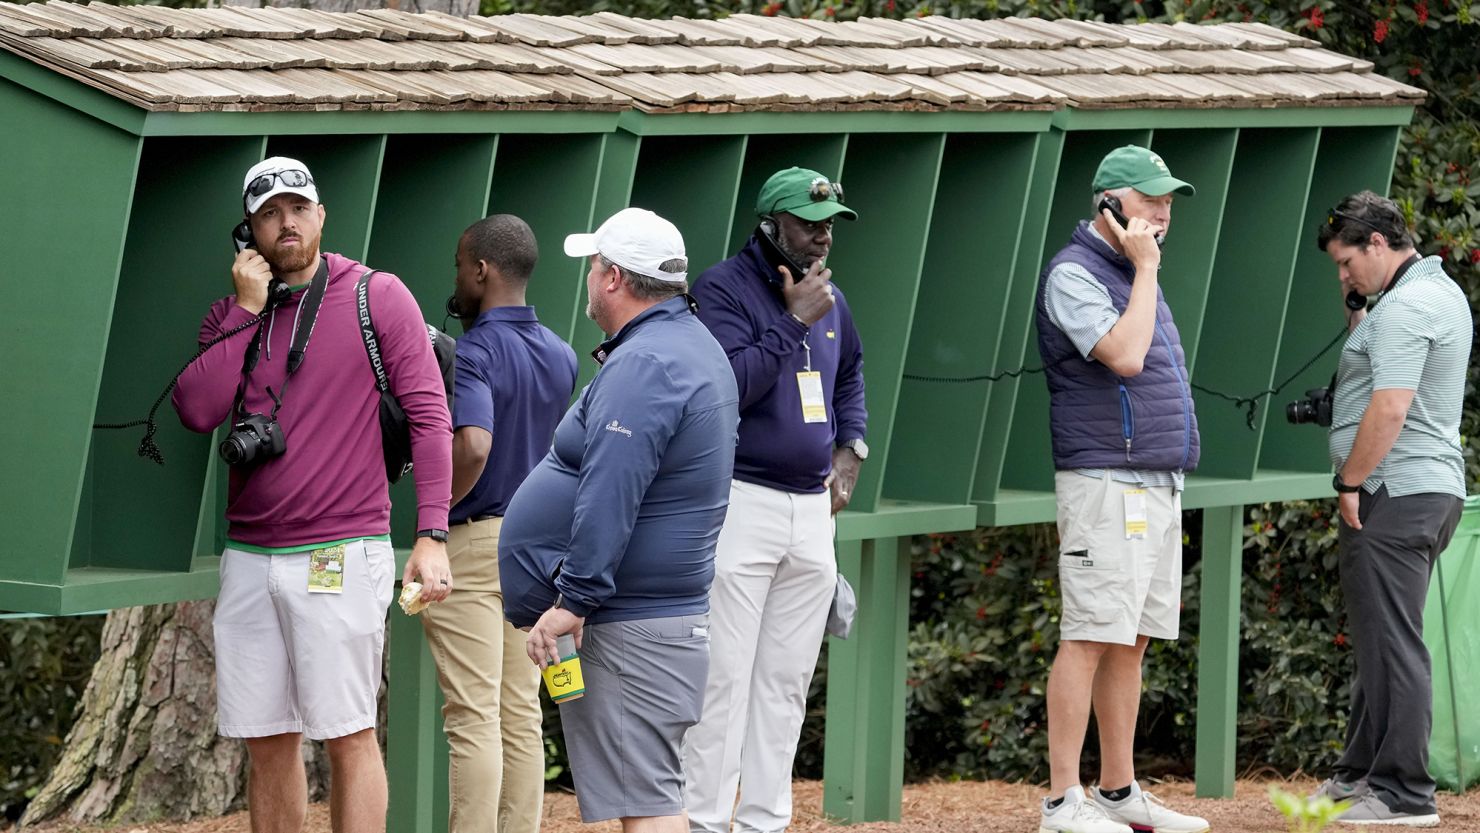 Patrons use course phones during a practice round for the Masters.